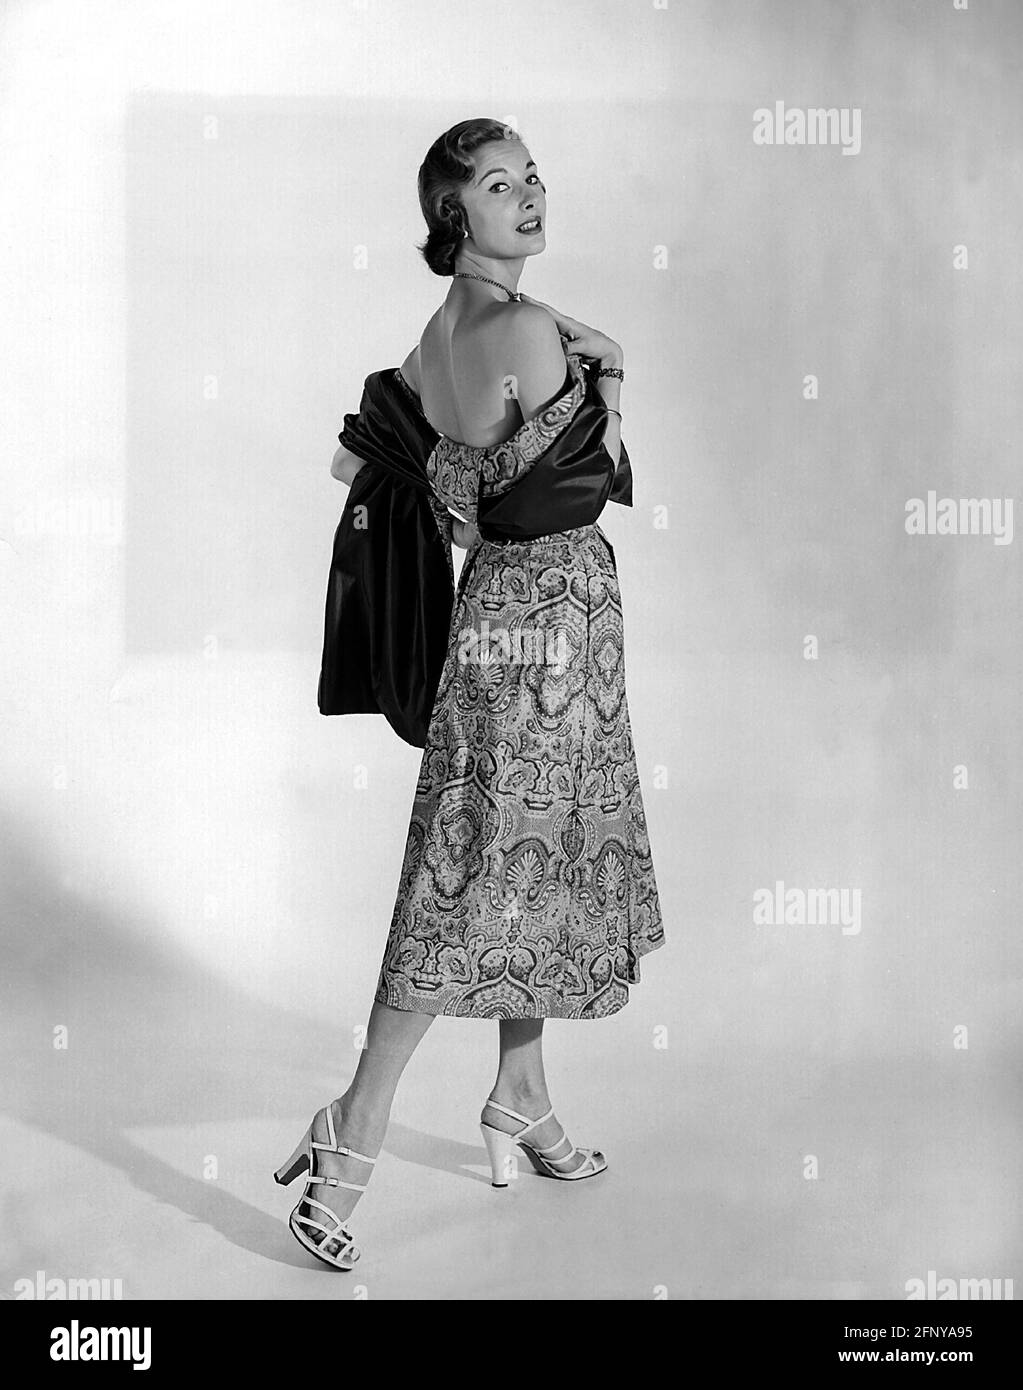 fashion, 1950s, ladies' fashion, woman wearing evening dress, full length, ADDITIONAL-RIGHTS-CLEARANCE-INFO-NOT-AVAILABLE Stock Photo